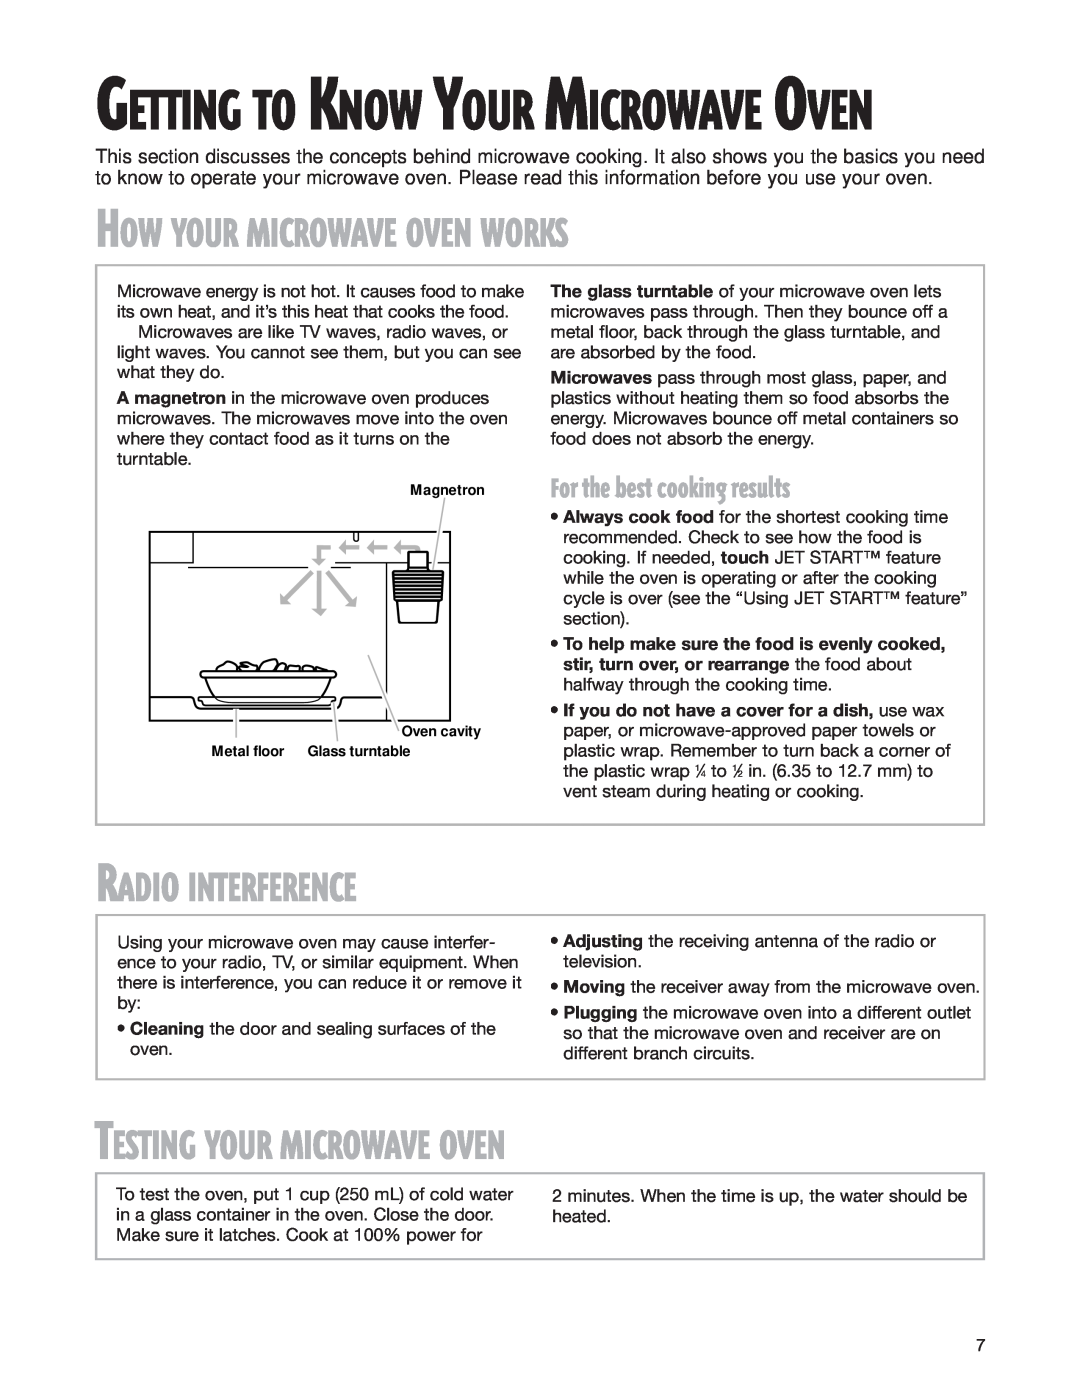 Whirlpool MH8150XJ installation instructions How Your Microwave Oven Works, Radio Interference, Testing Your Microwave Oven 